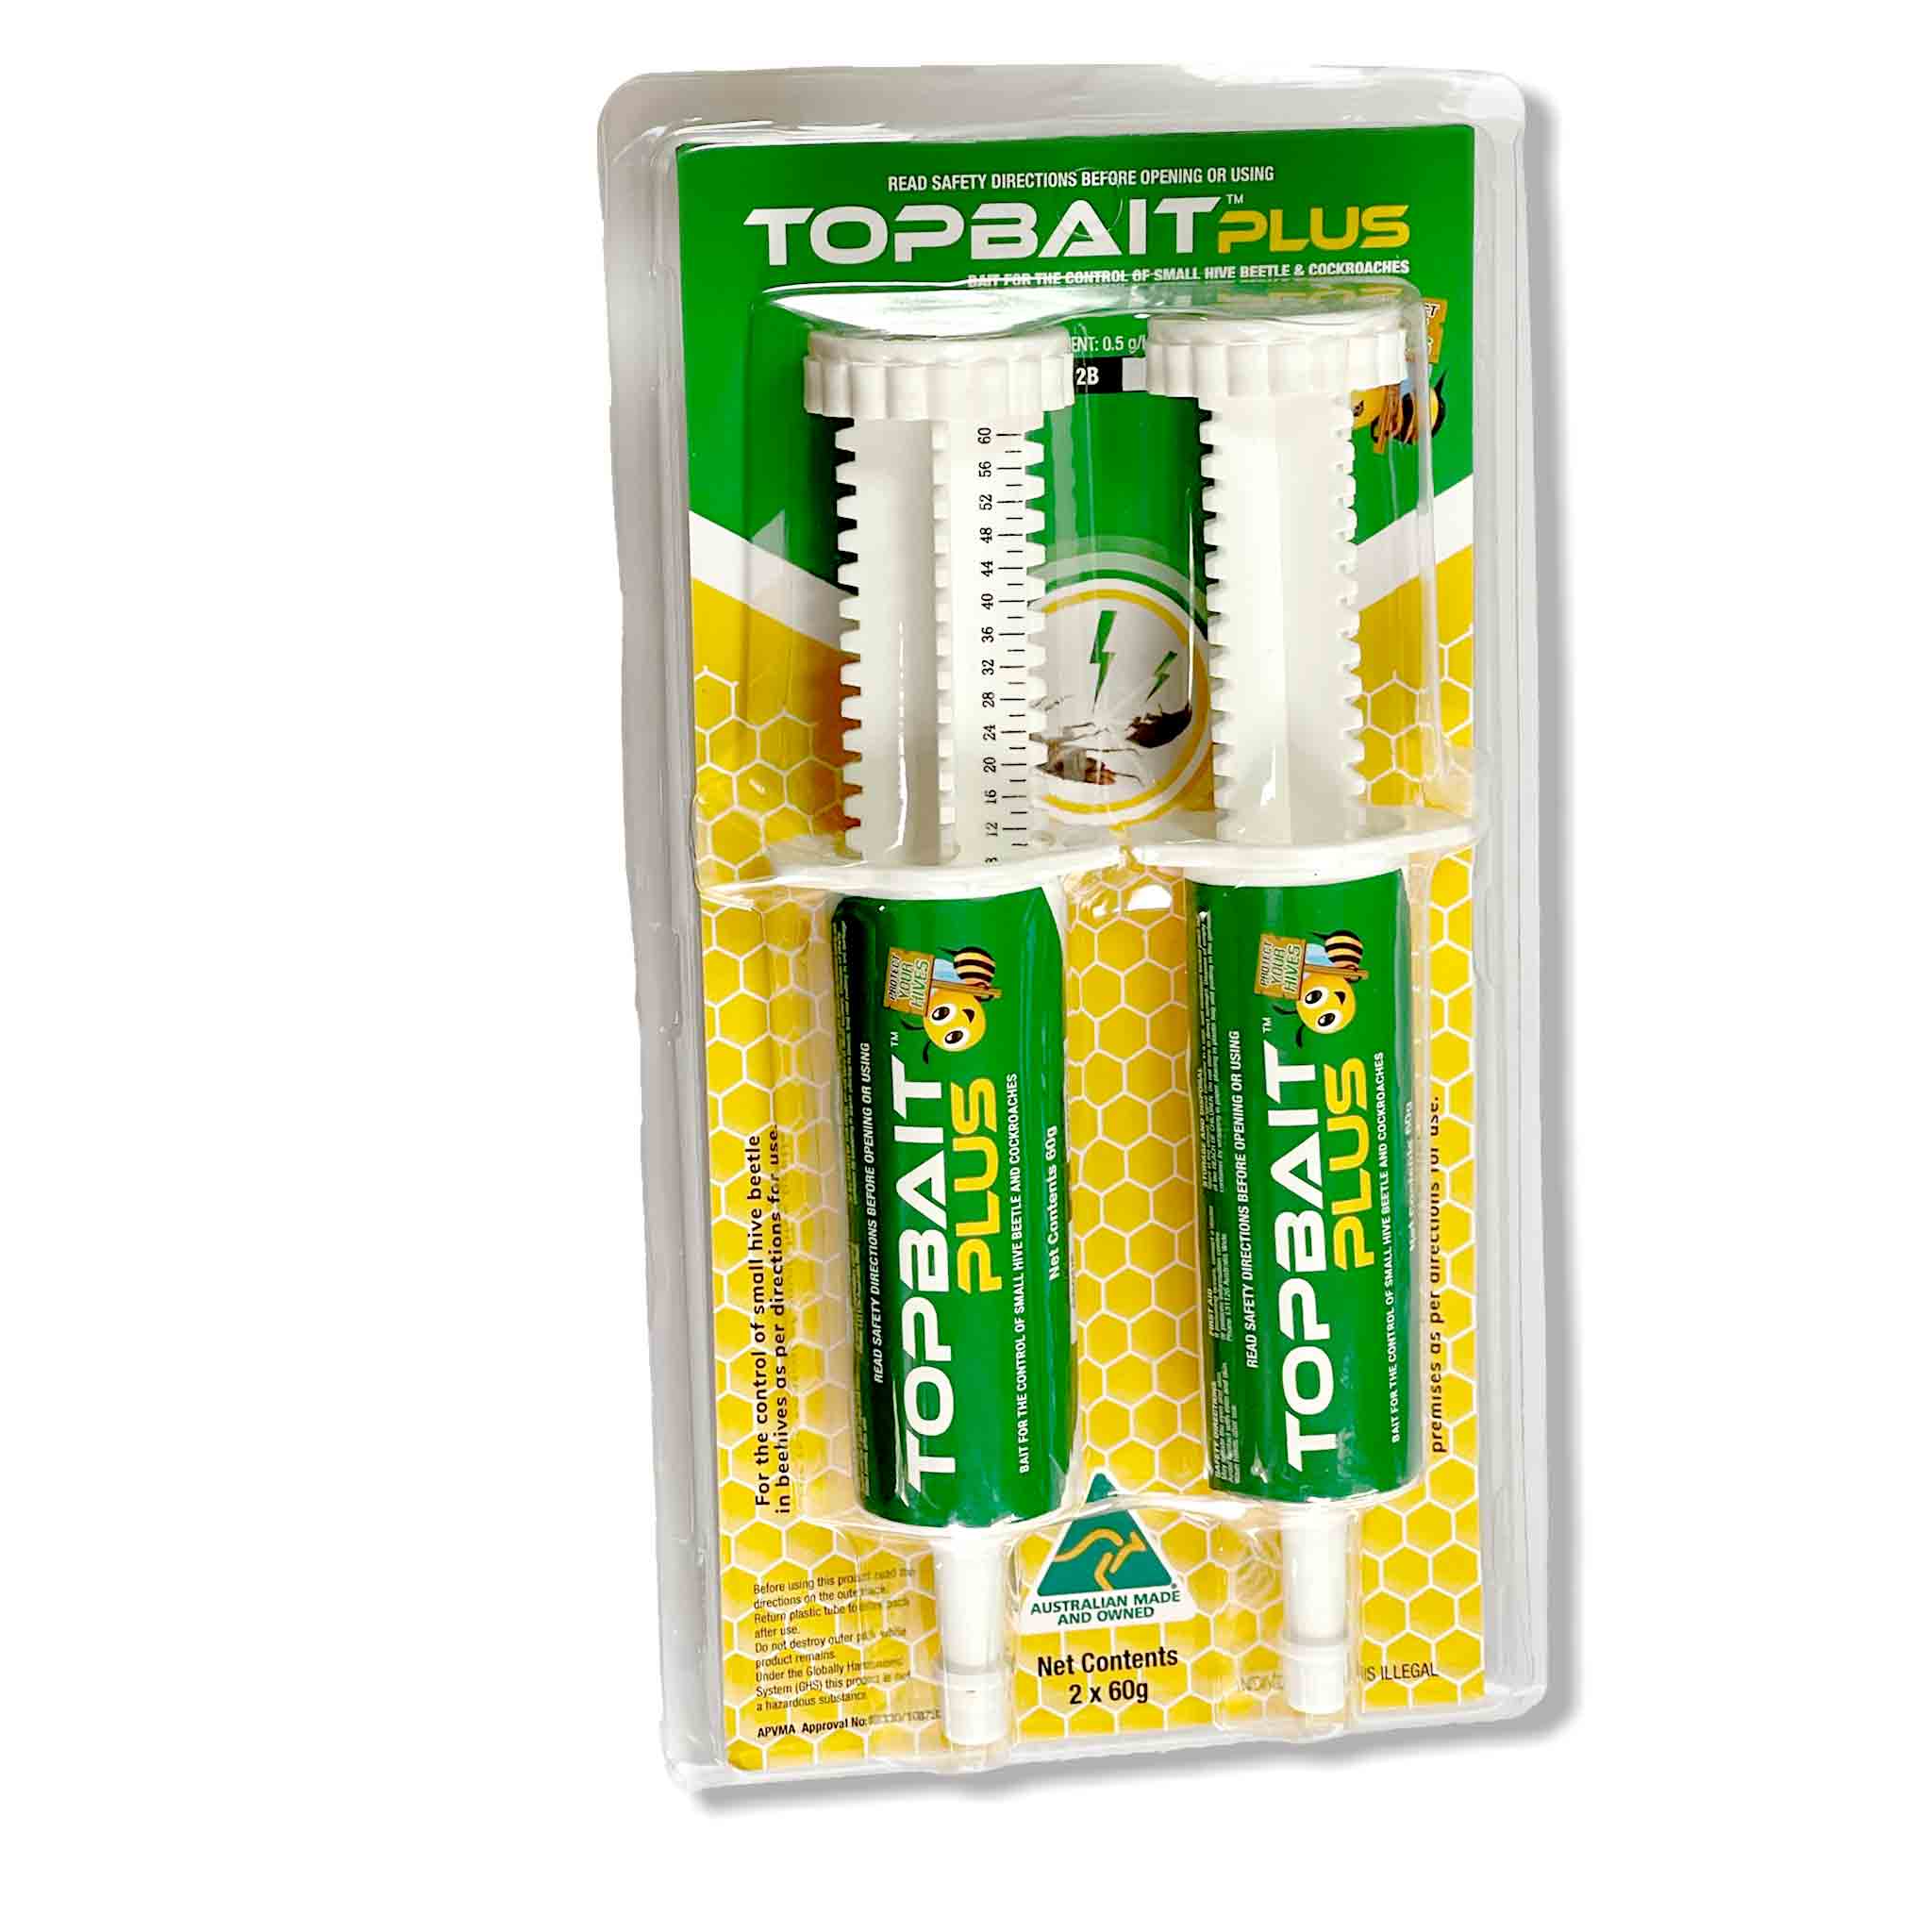 TopBait Plus 2 x 60g Pack Applicators for Treatment and Control of Small Hive Beetles and Cockroaches - Health collection by Buzzbee Beekeeping Supplies